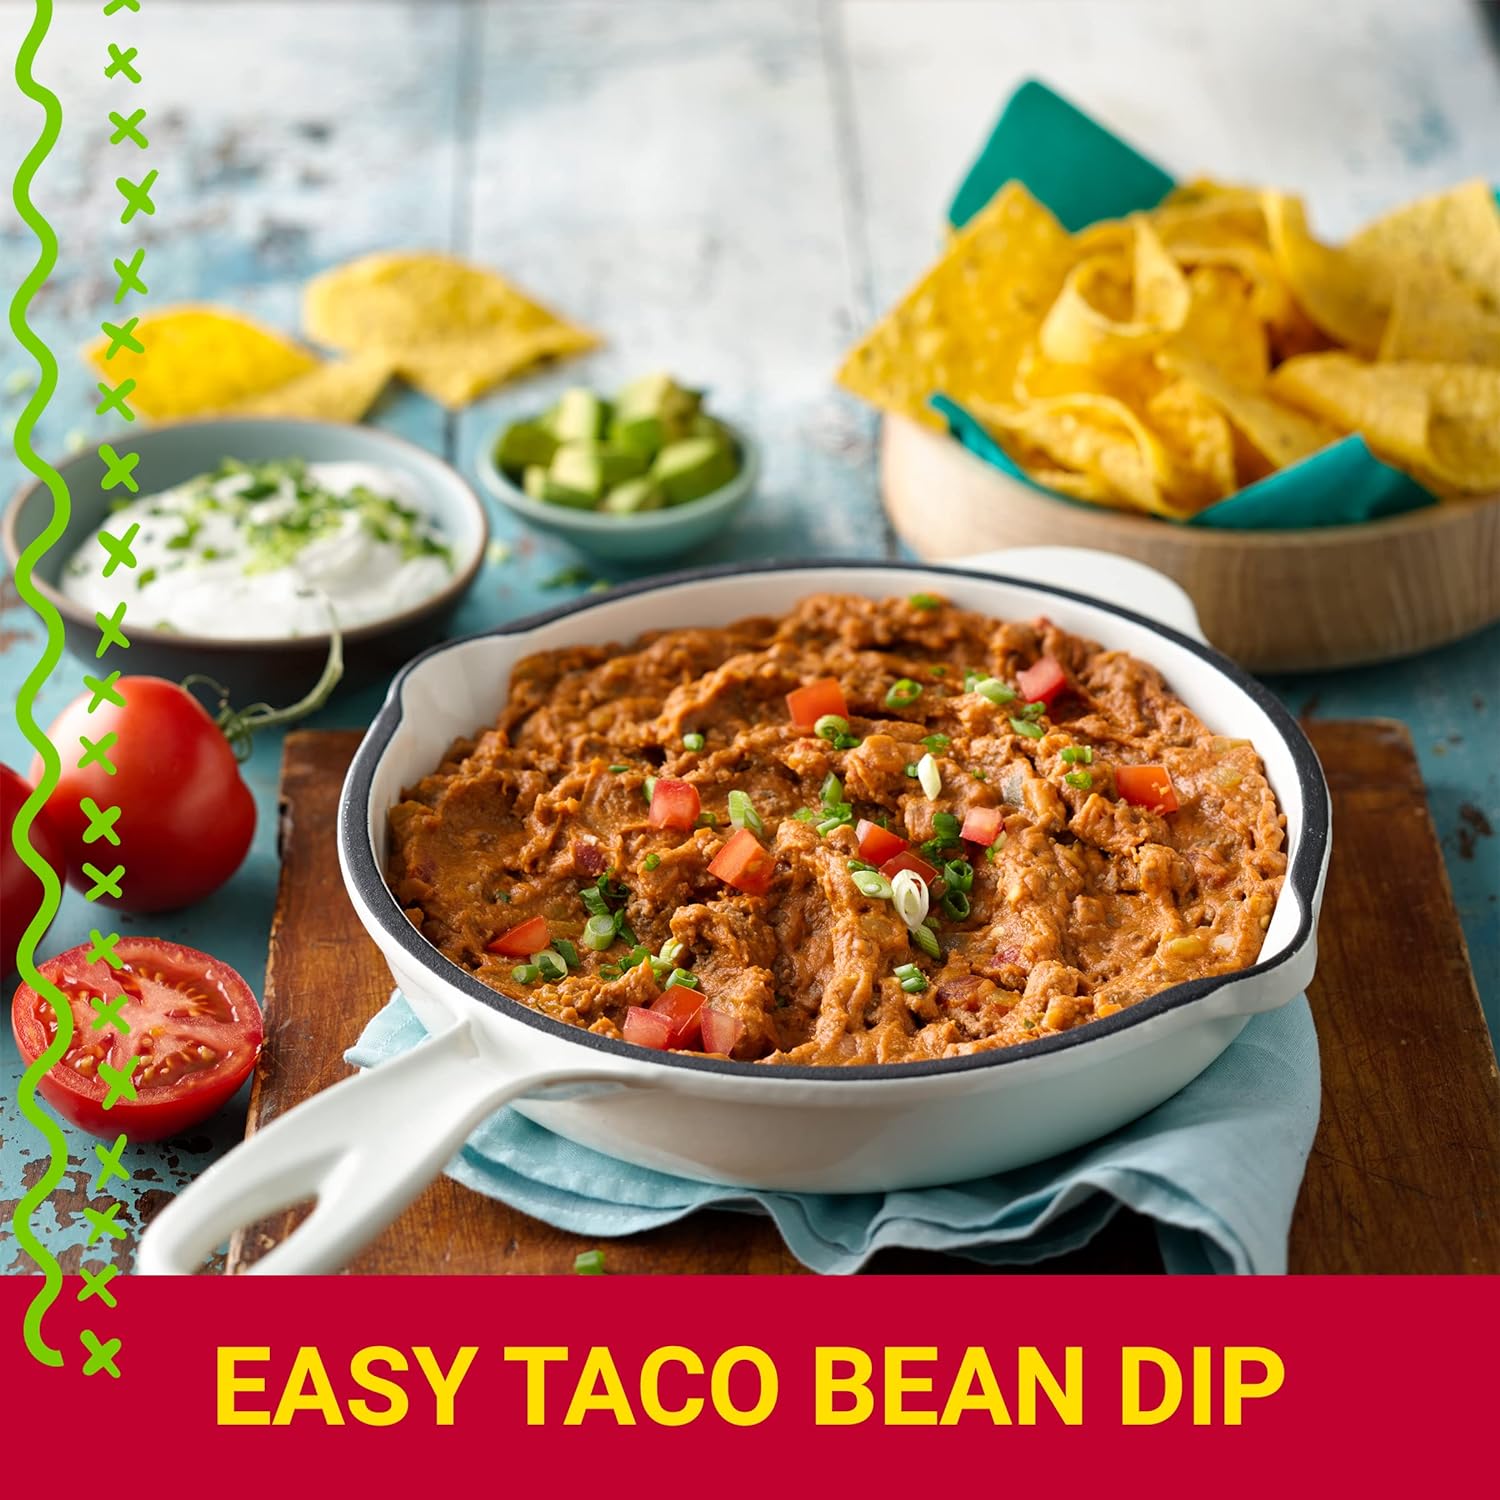 Old El Paso Fat Free Refried Beans, 16 oz. (Pack of 12) : Grocery & Gourmet Food